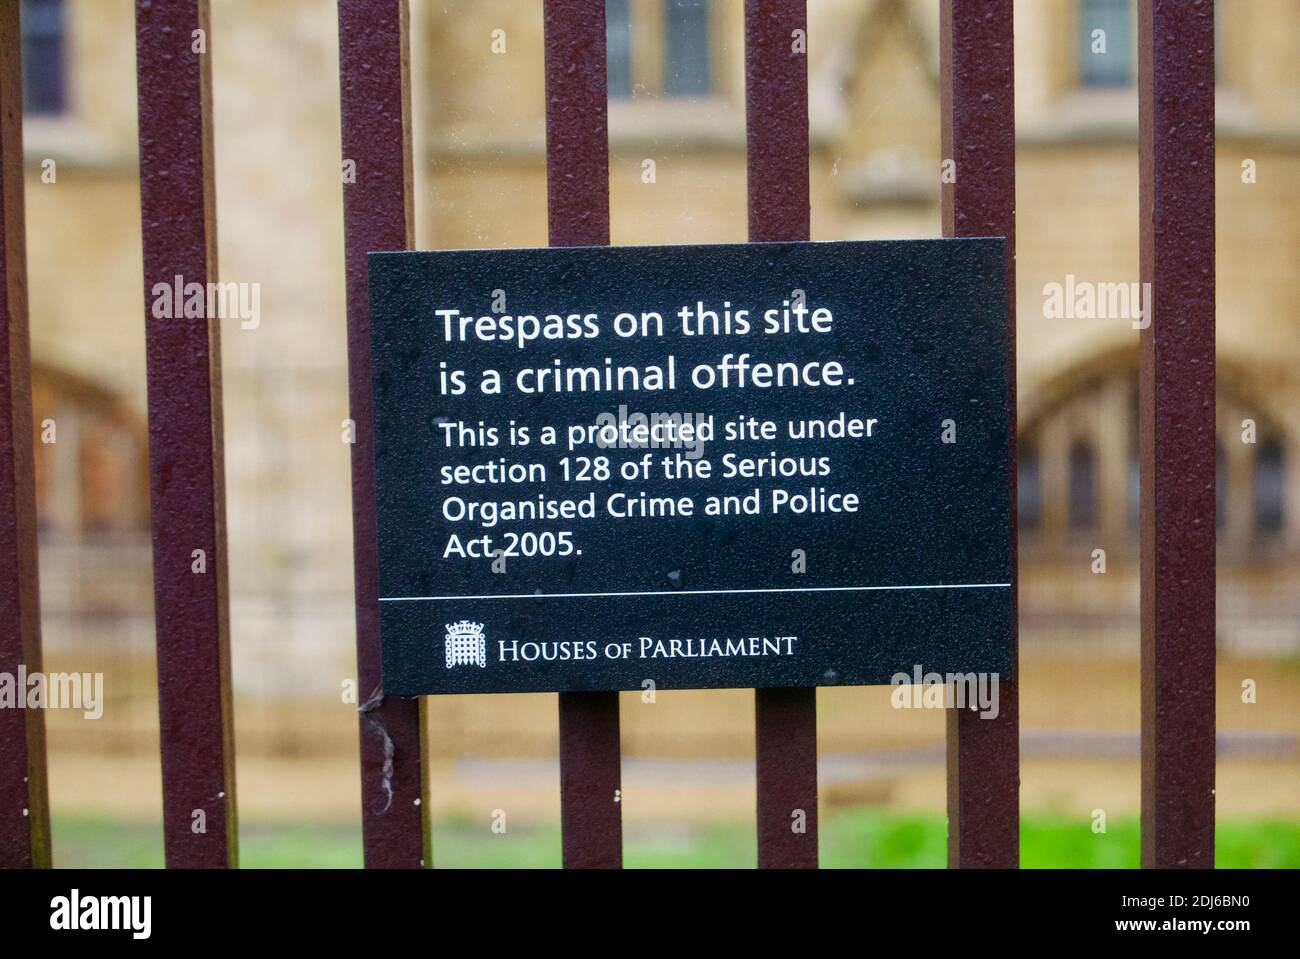 Sign at Palace of Westminster stating trespass a criminal offence under Section 128 Serious Organised Crime and Police Act 2005. UK Parliament London Stock Photo